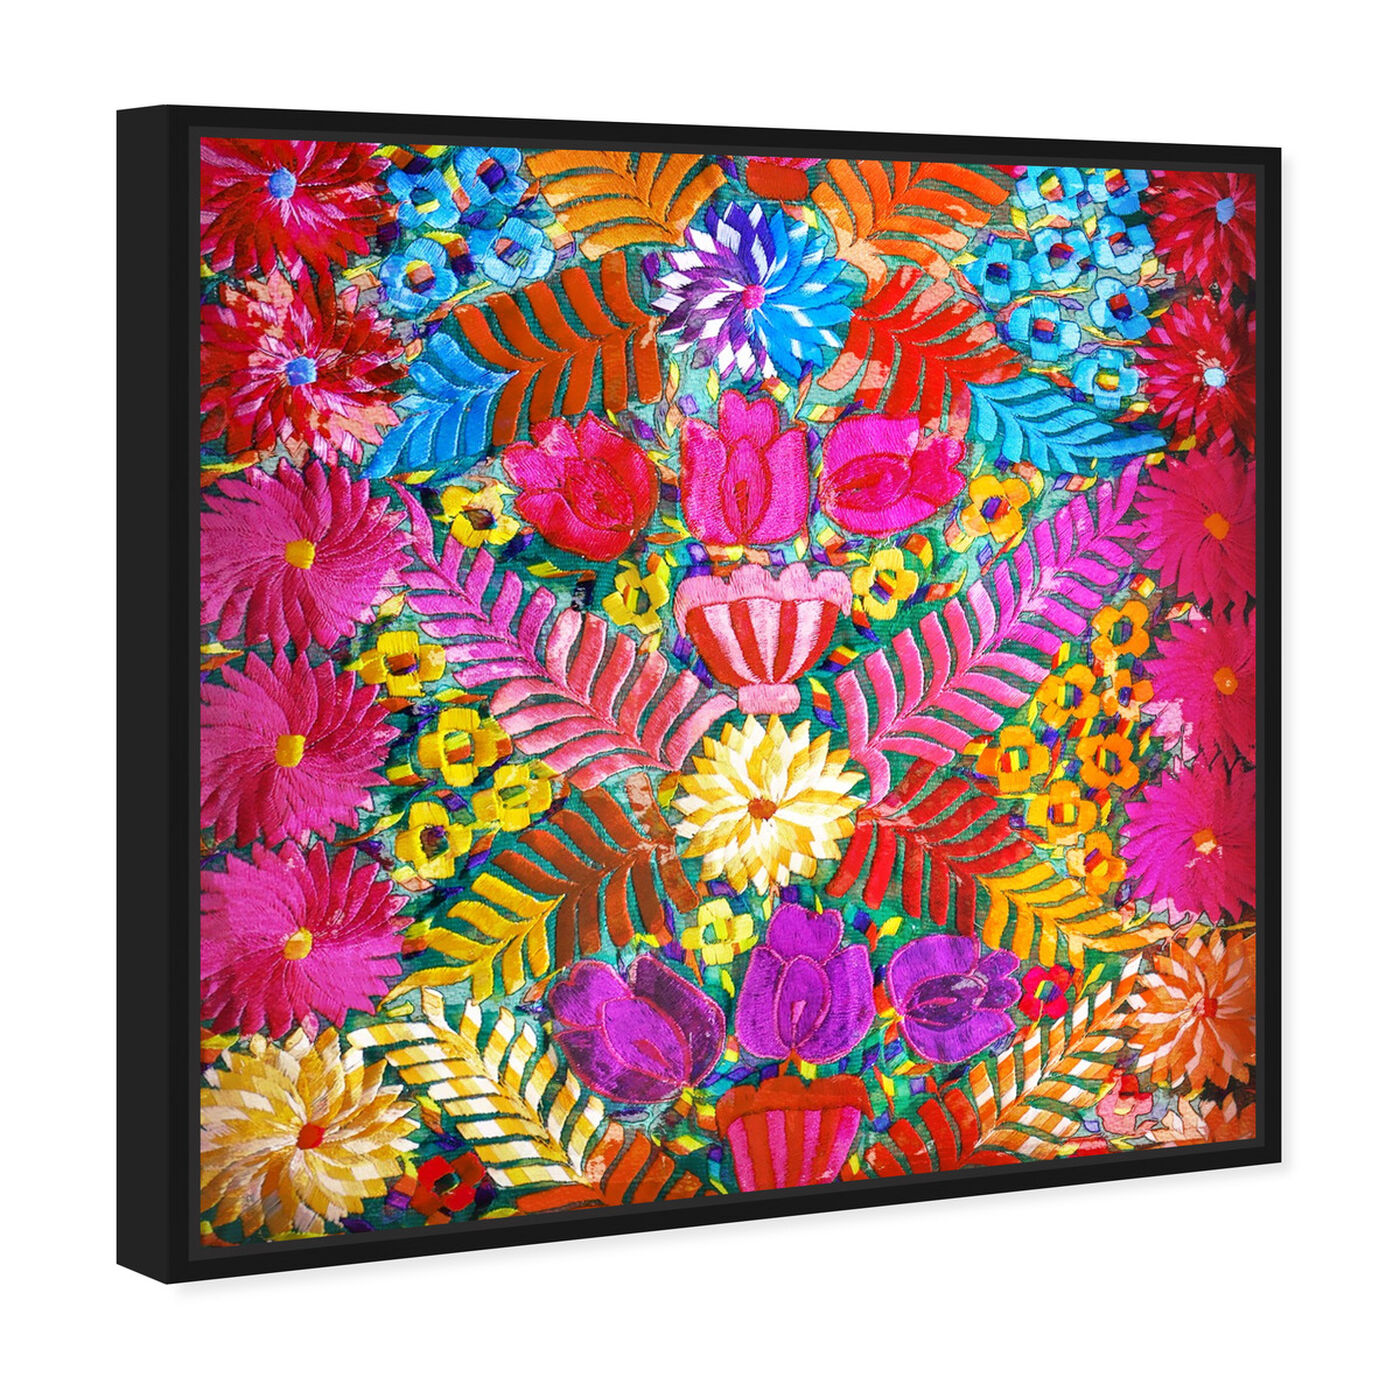 Angled view of Prado Floral featuring floral and botanical and florals art.